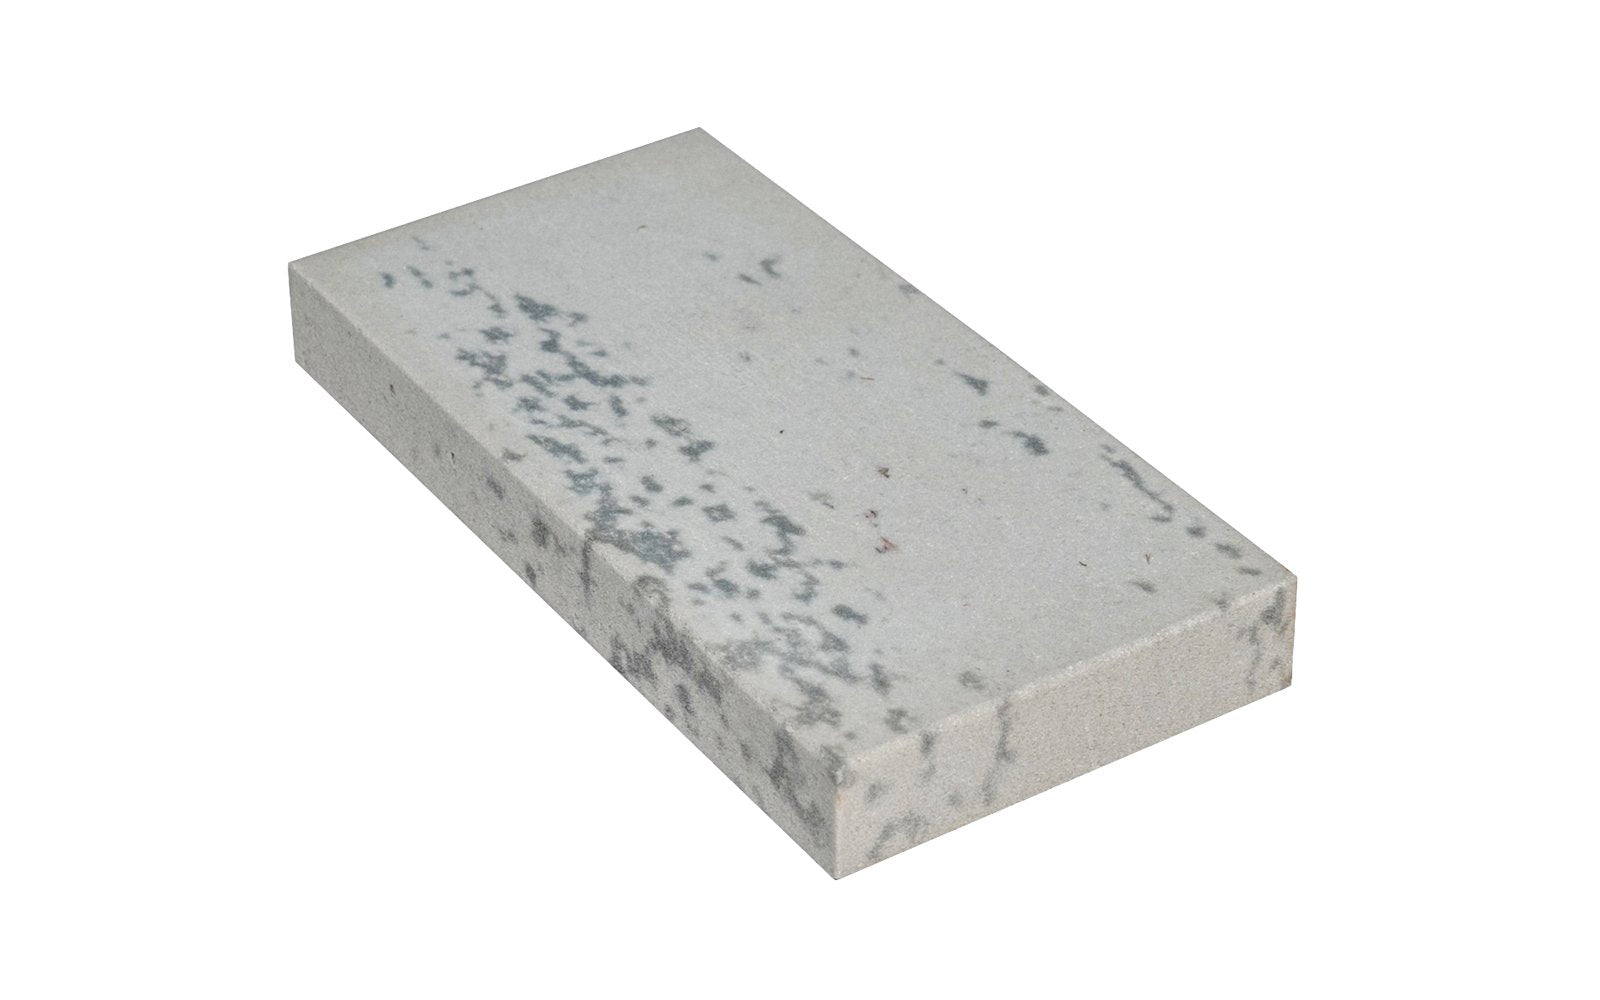 Soft Arkansas Bench Stone with Wooden Box ~ 4" x 2" - Made in USA ~ Good extra-fine stone. It is the least dense & coarsest grained of the natural Arkansas stones & good for starting an edge on your tools & knives; commonly used after synthetic or oil stone - Model No. MAB-42-C